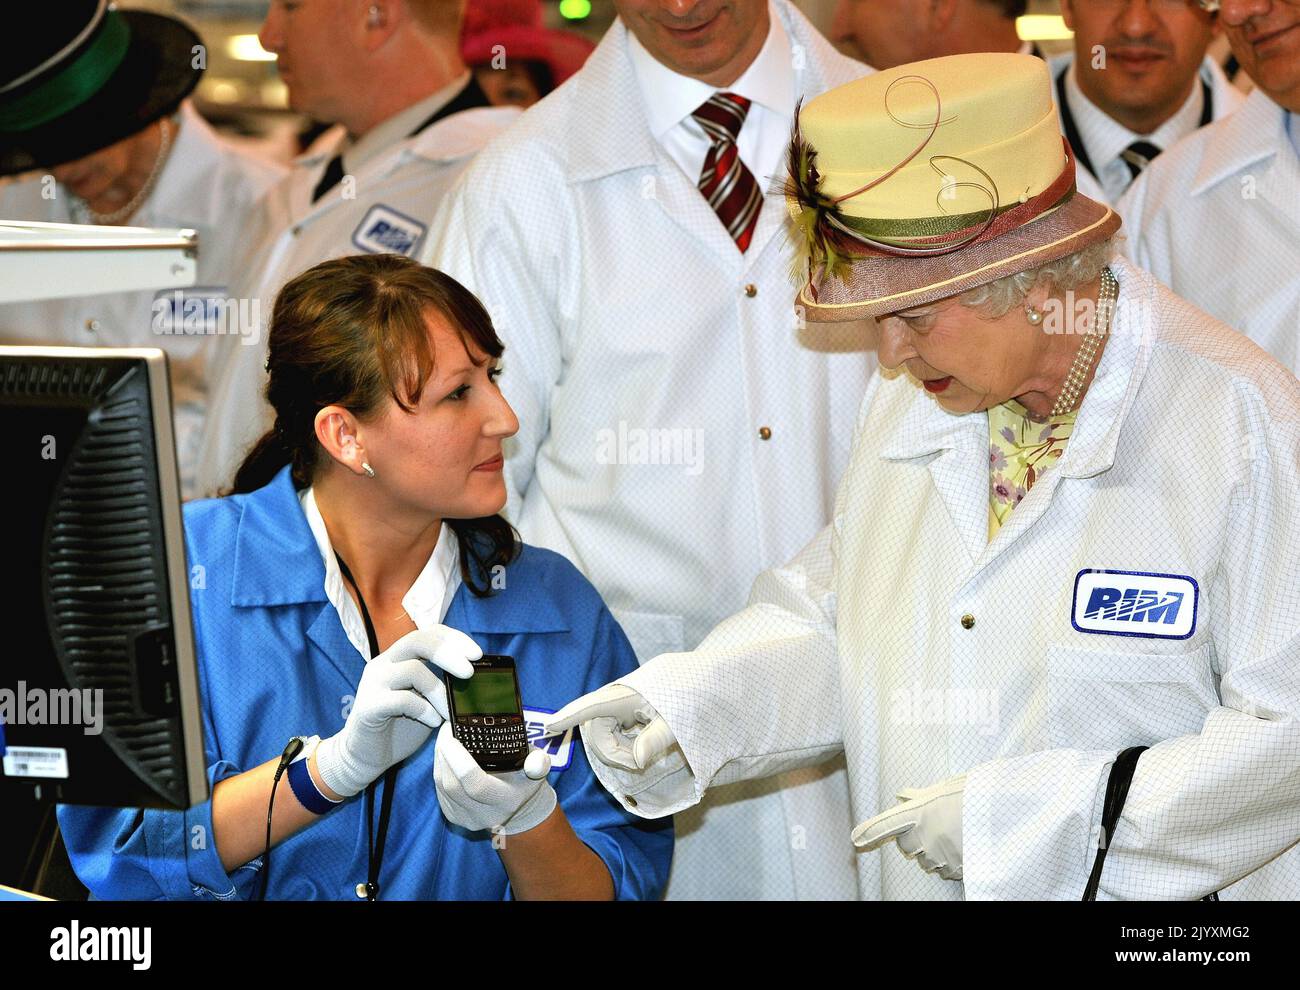 File photo dated 5/7/2010 of Queen Elizabeth II being shown a new product, at the final testing before packaging test area as she toured the RIM (Research in Motion) factory that produces the Blackberry mobile communications handset, in Waterloo, Canada. The Queen's life was steeped in tradition, but she kept up with the vast technological advances that occurred during her reign. She saw the advent of popular colour television, mobile phones, the internet and social media and held audiences and meetings over video conference. Issue date: Thursday September 8, 2022. Stock Photo